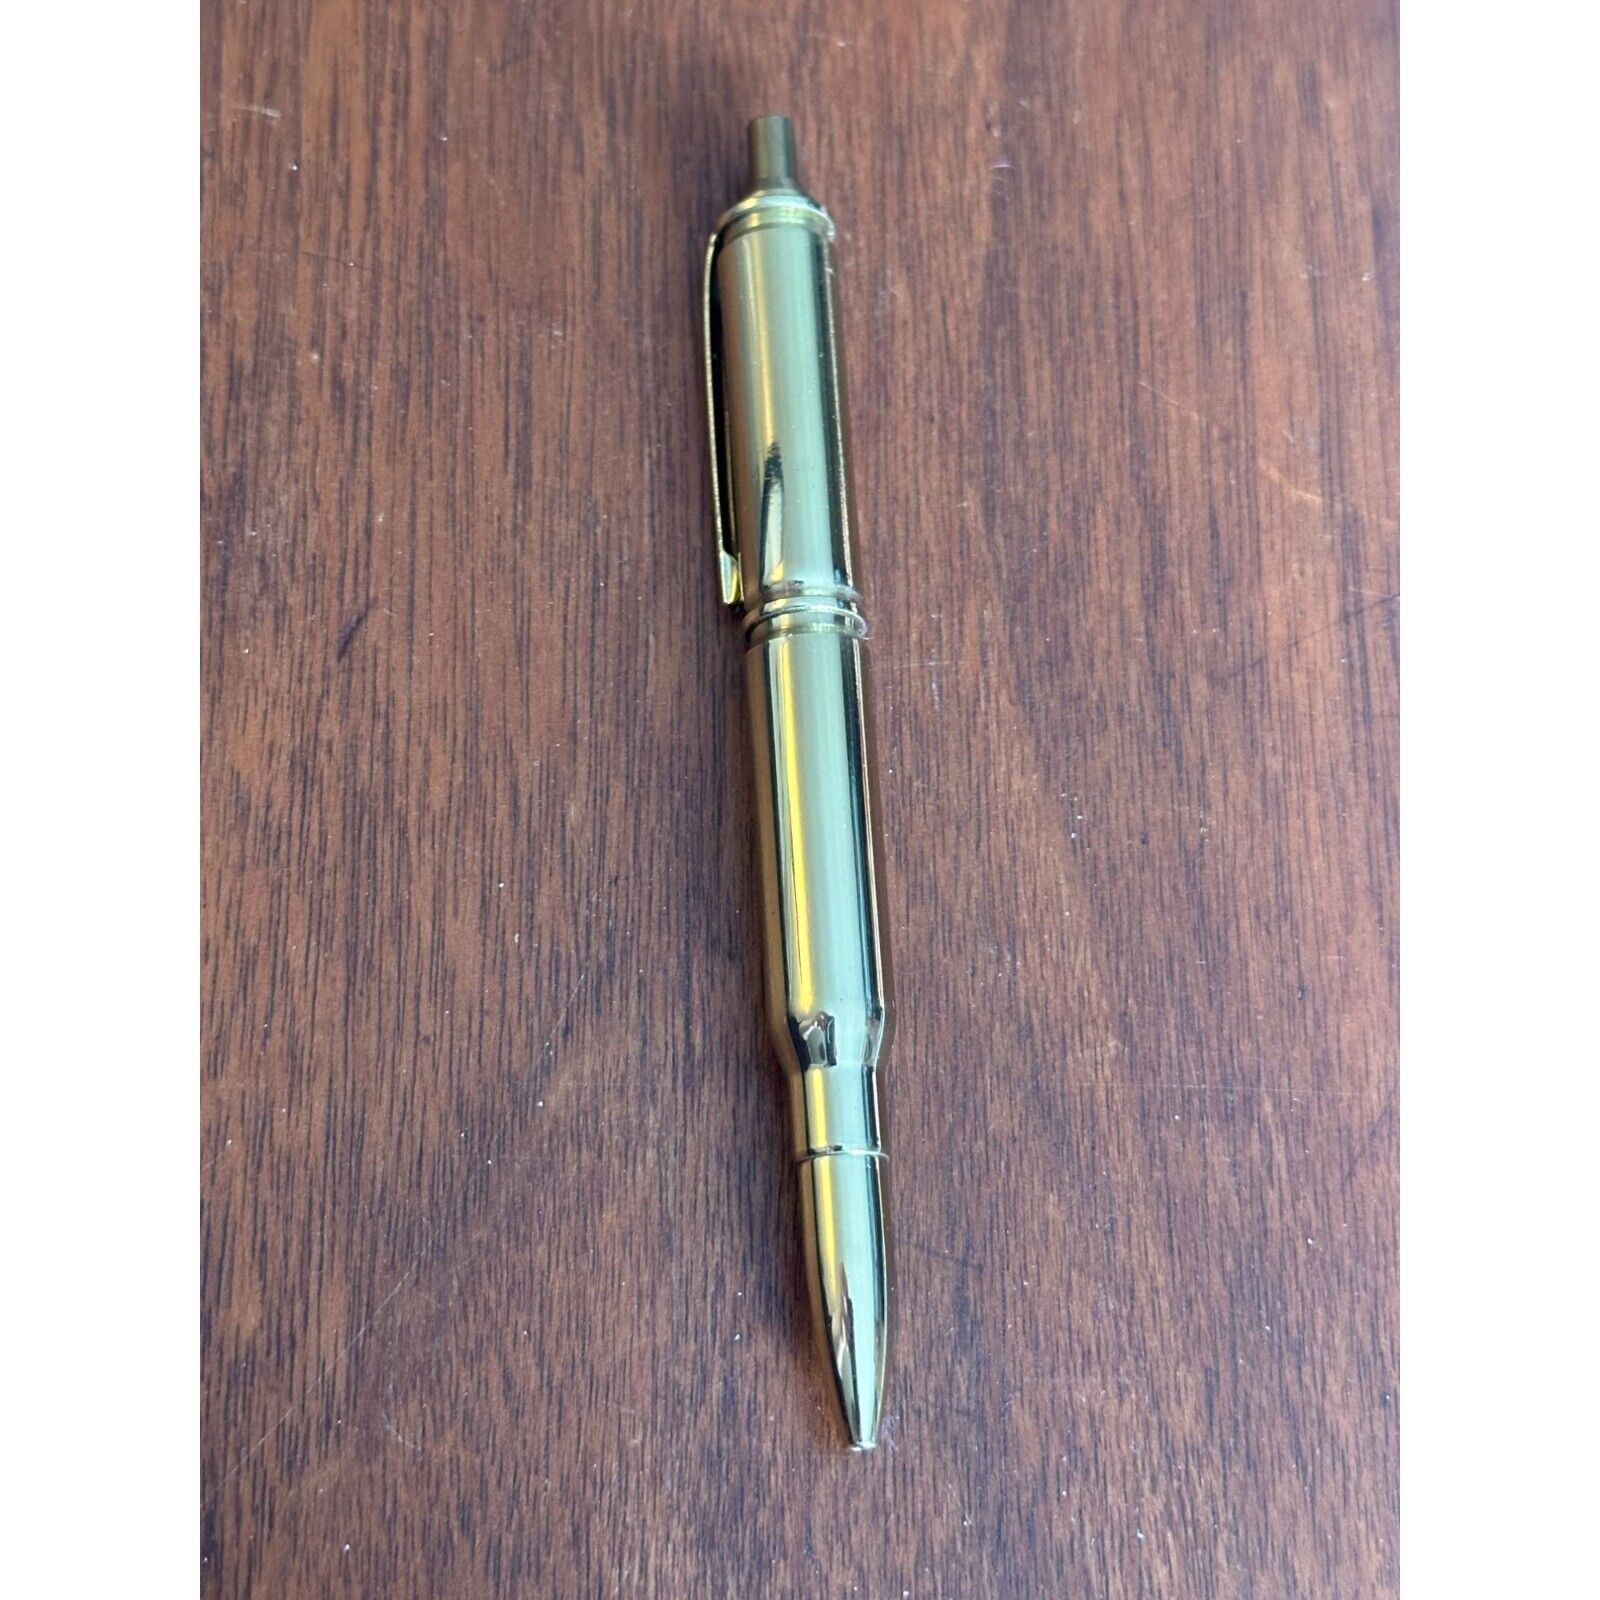 Made in West Germany Vintage Ball Point Pen